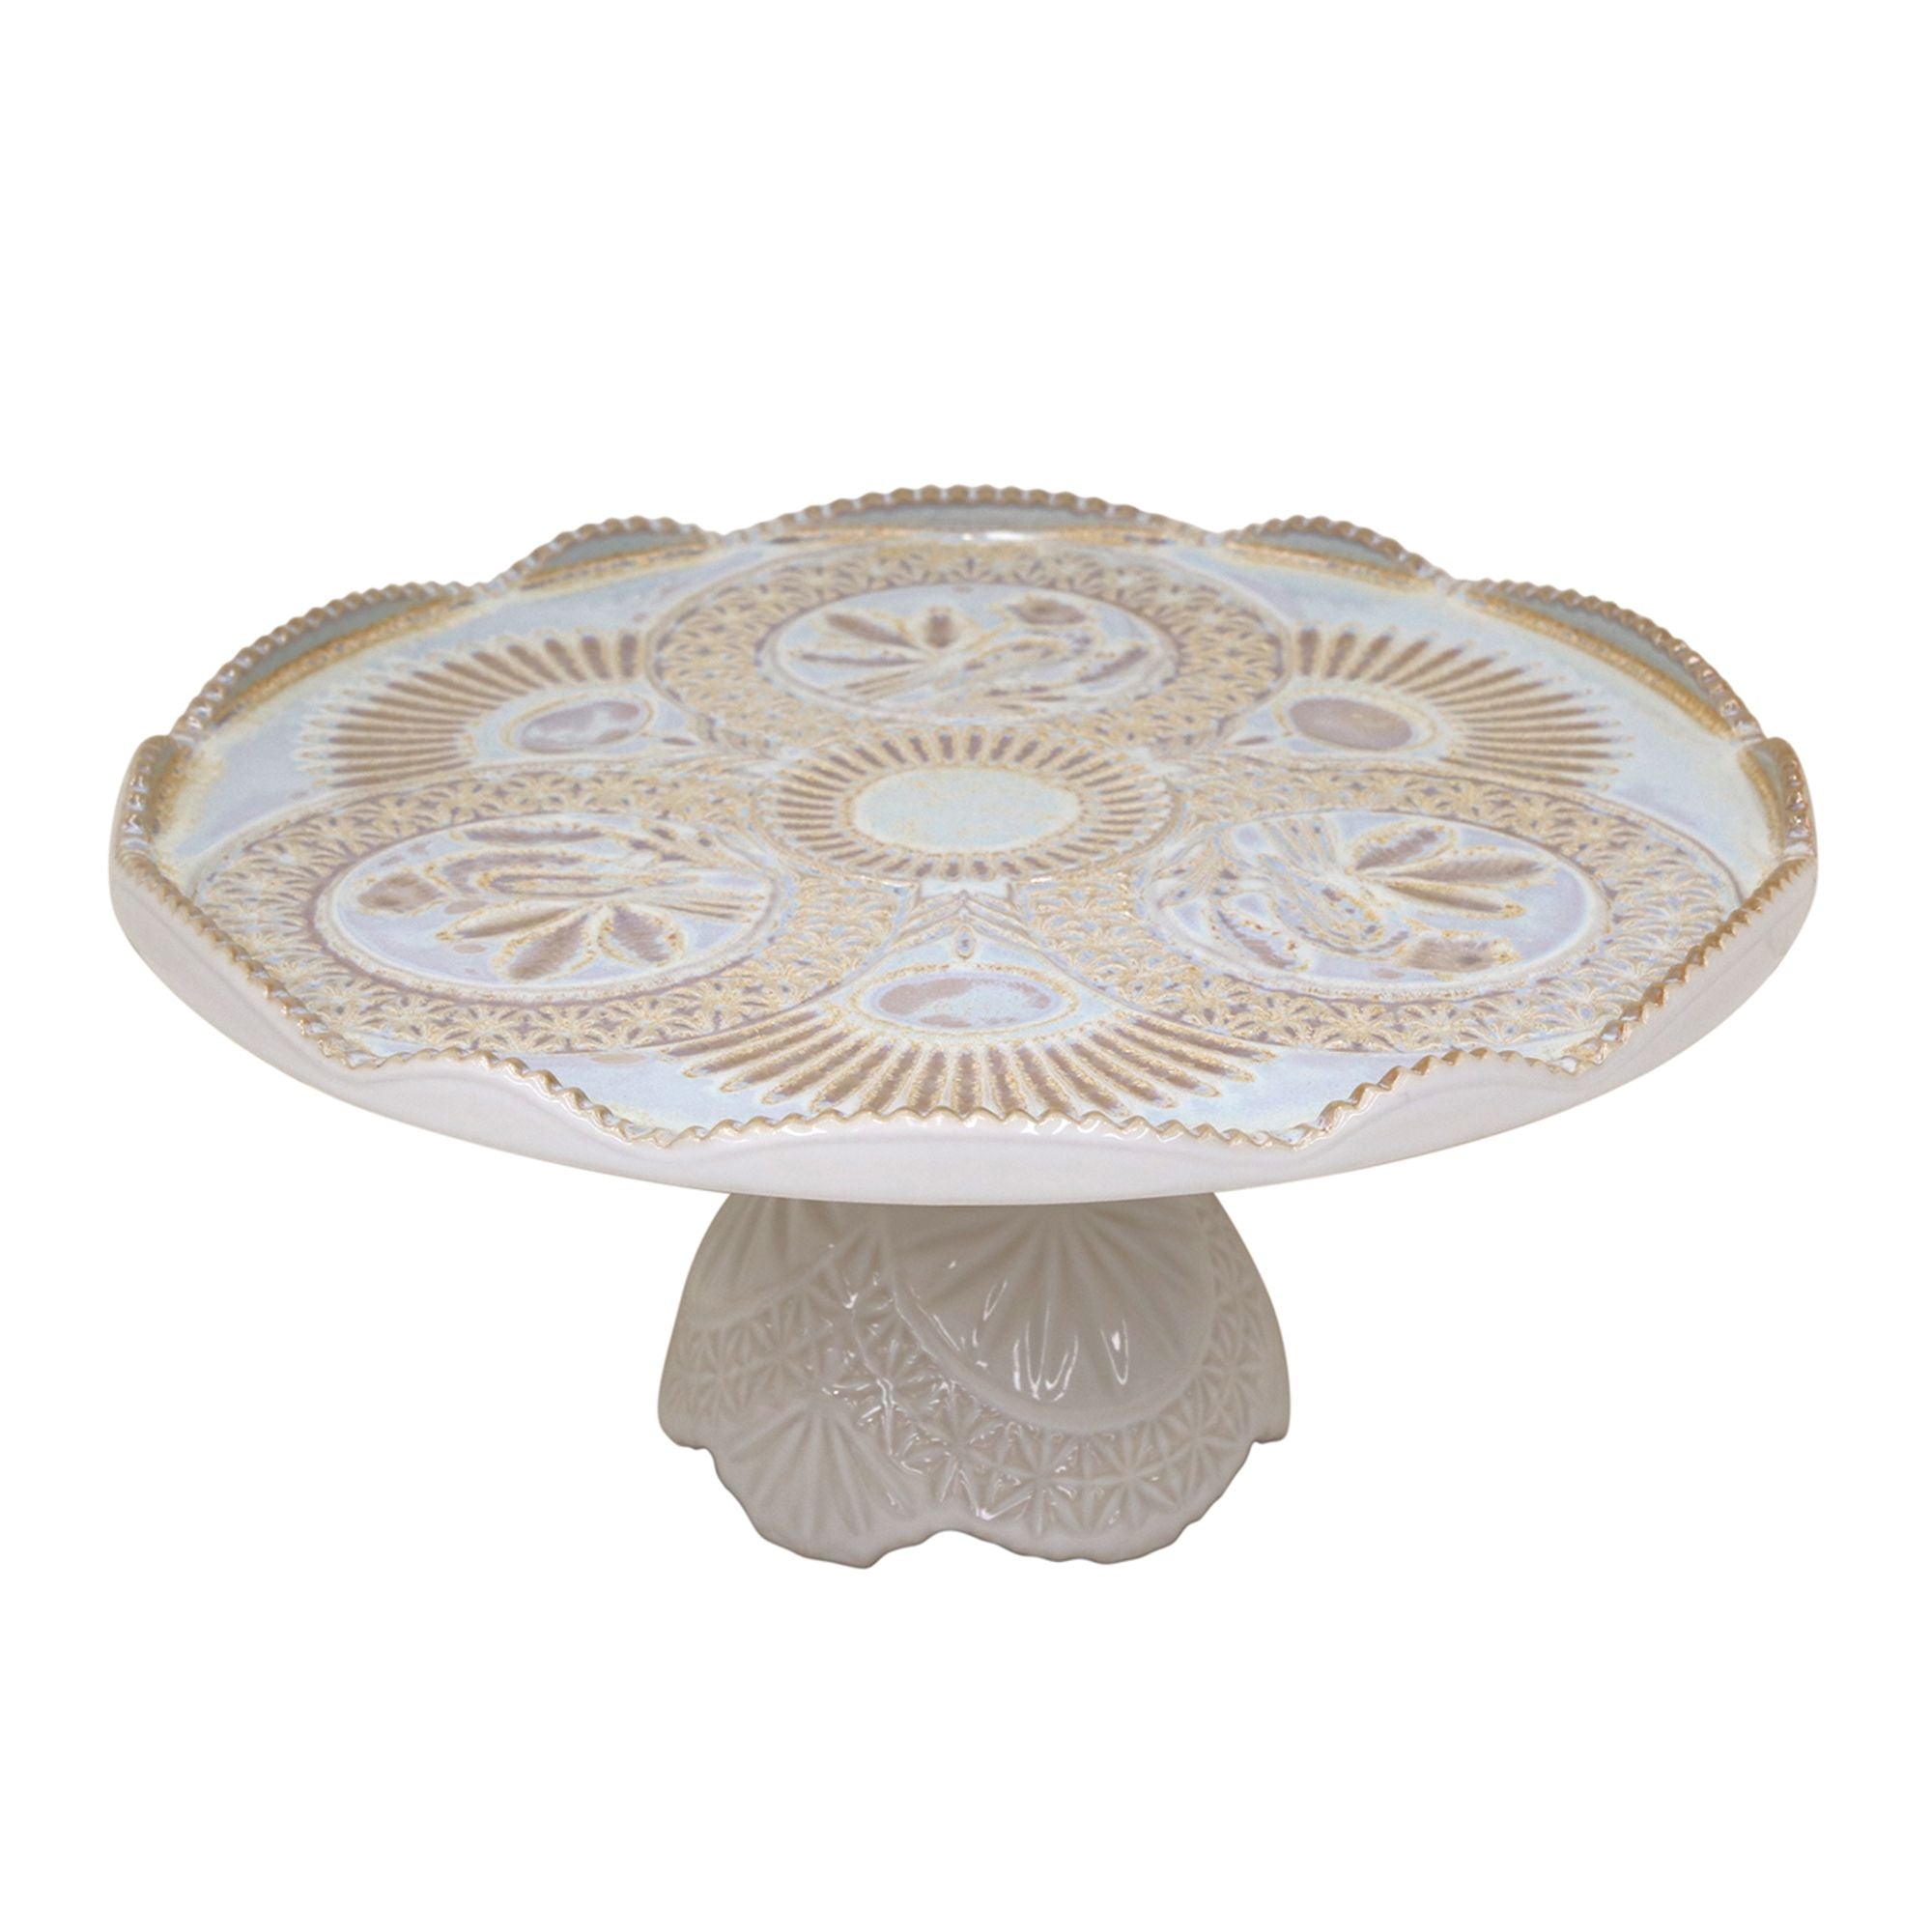 Cristal Footed Plate 12" Nacar